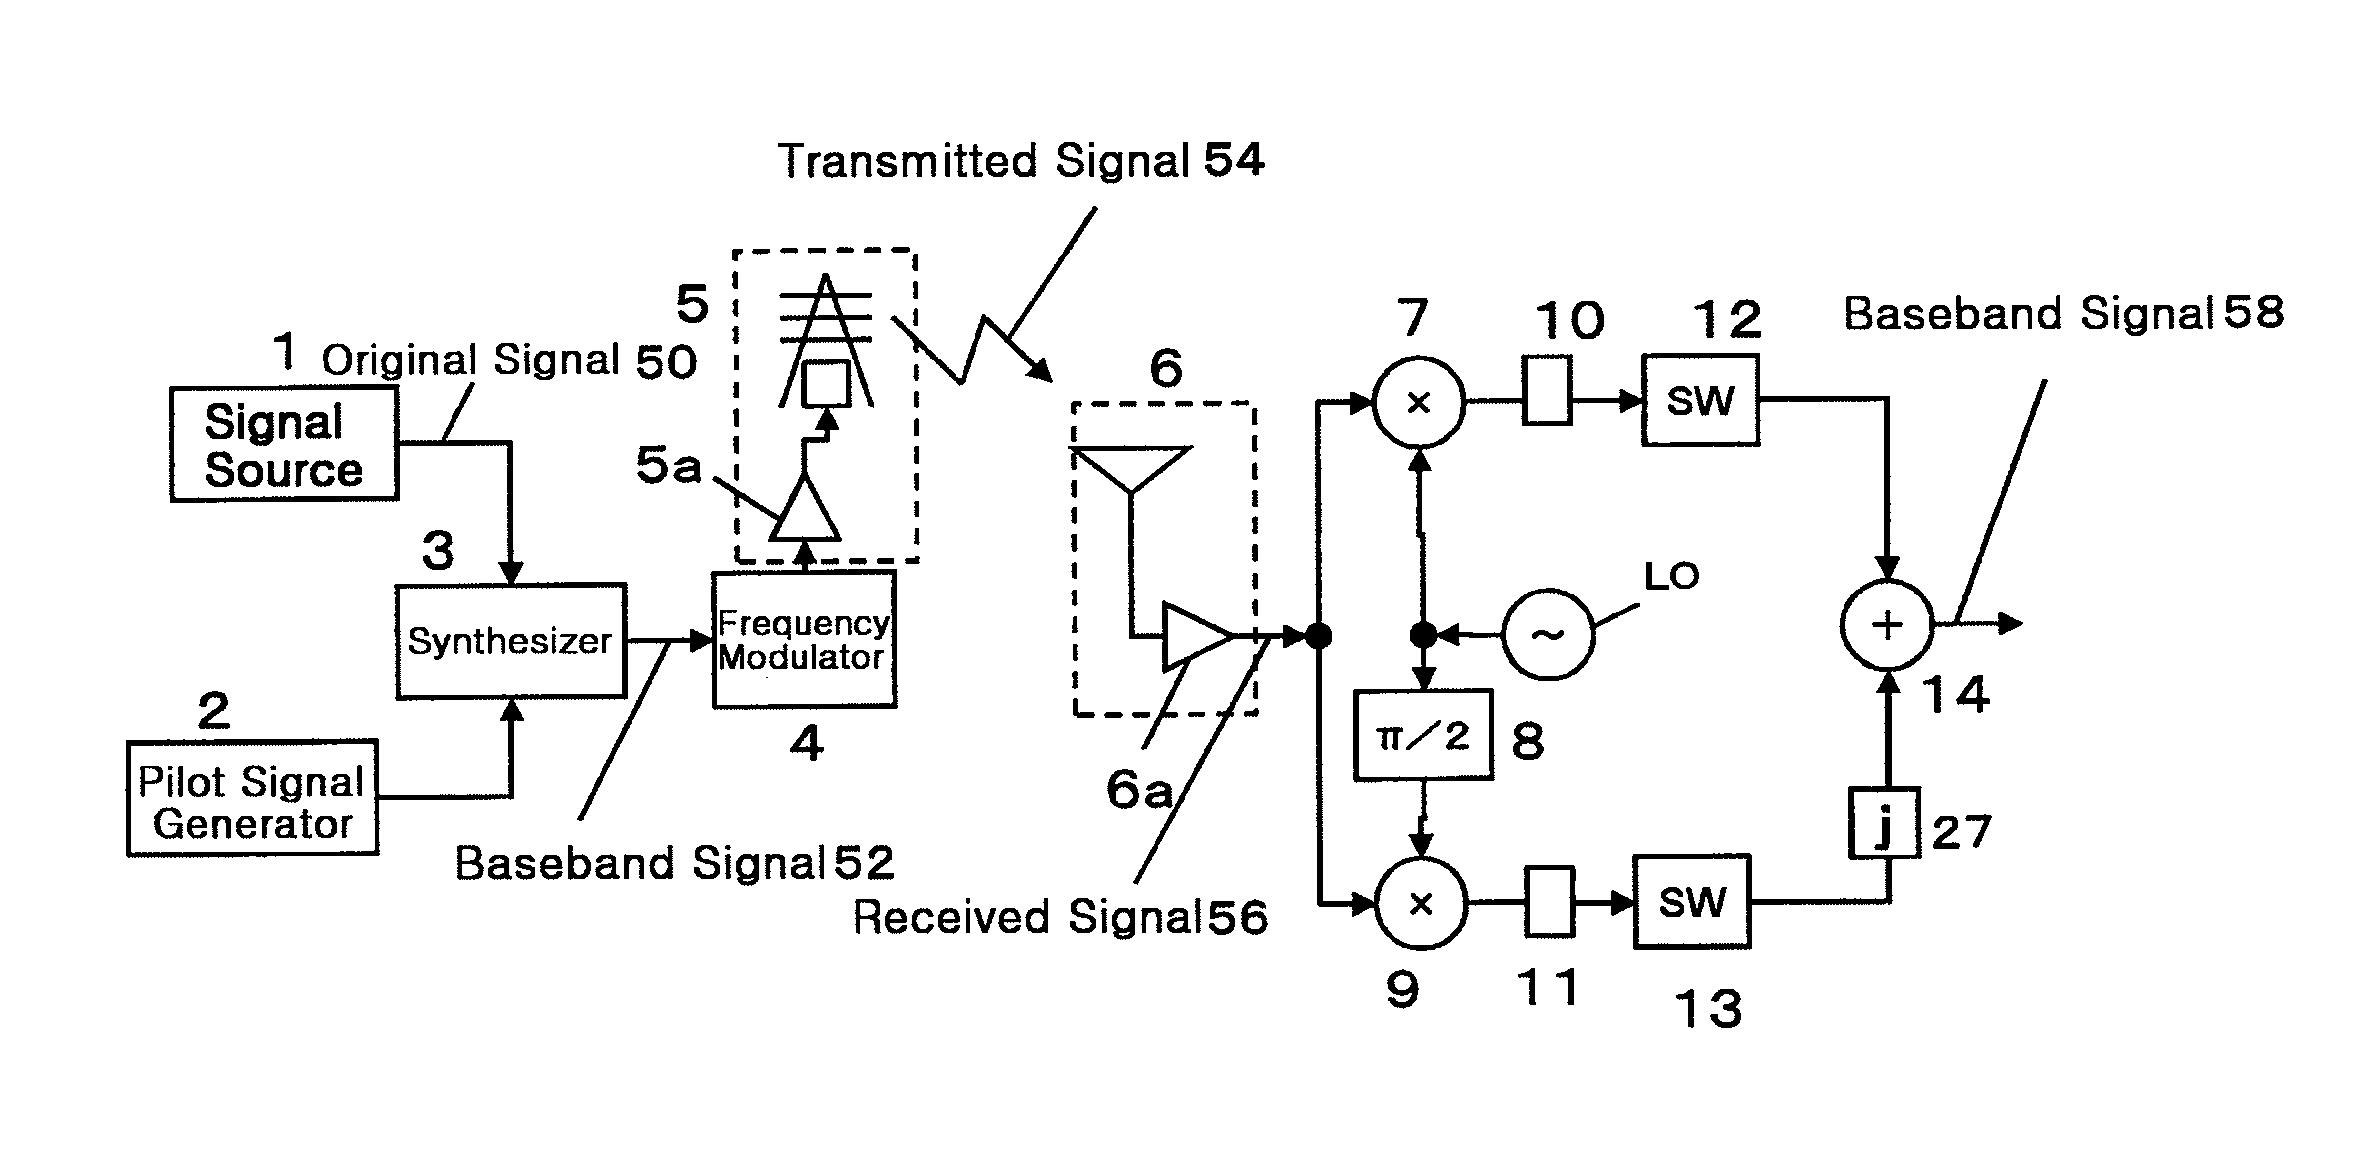 Method for determining hybrid domain compensation parameters for analog loss in OFDM communication systems and compensating for the same